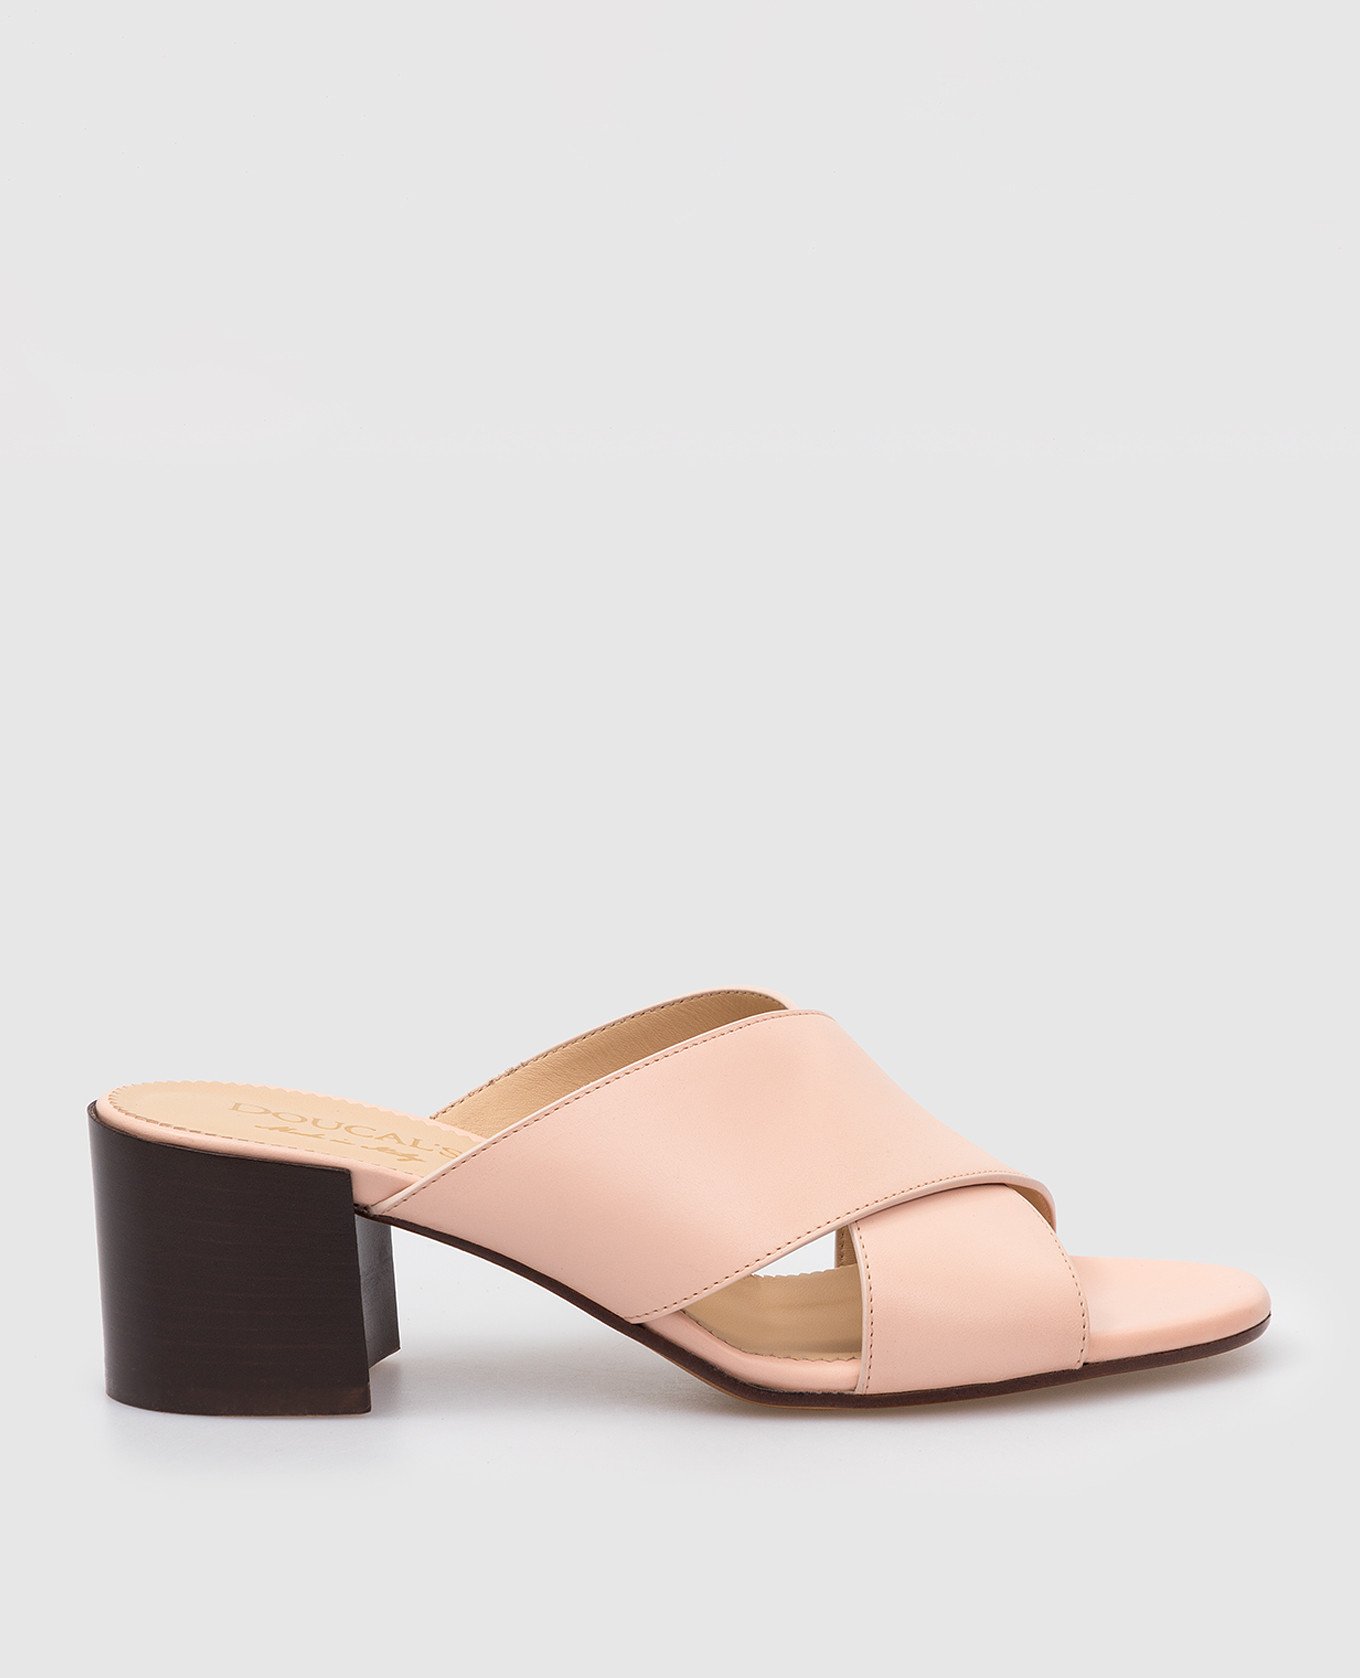 Powdery leather sandals